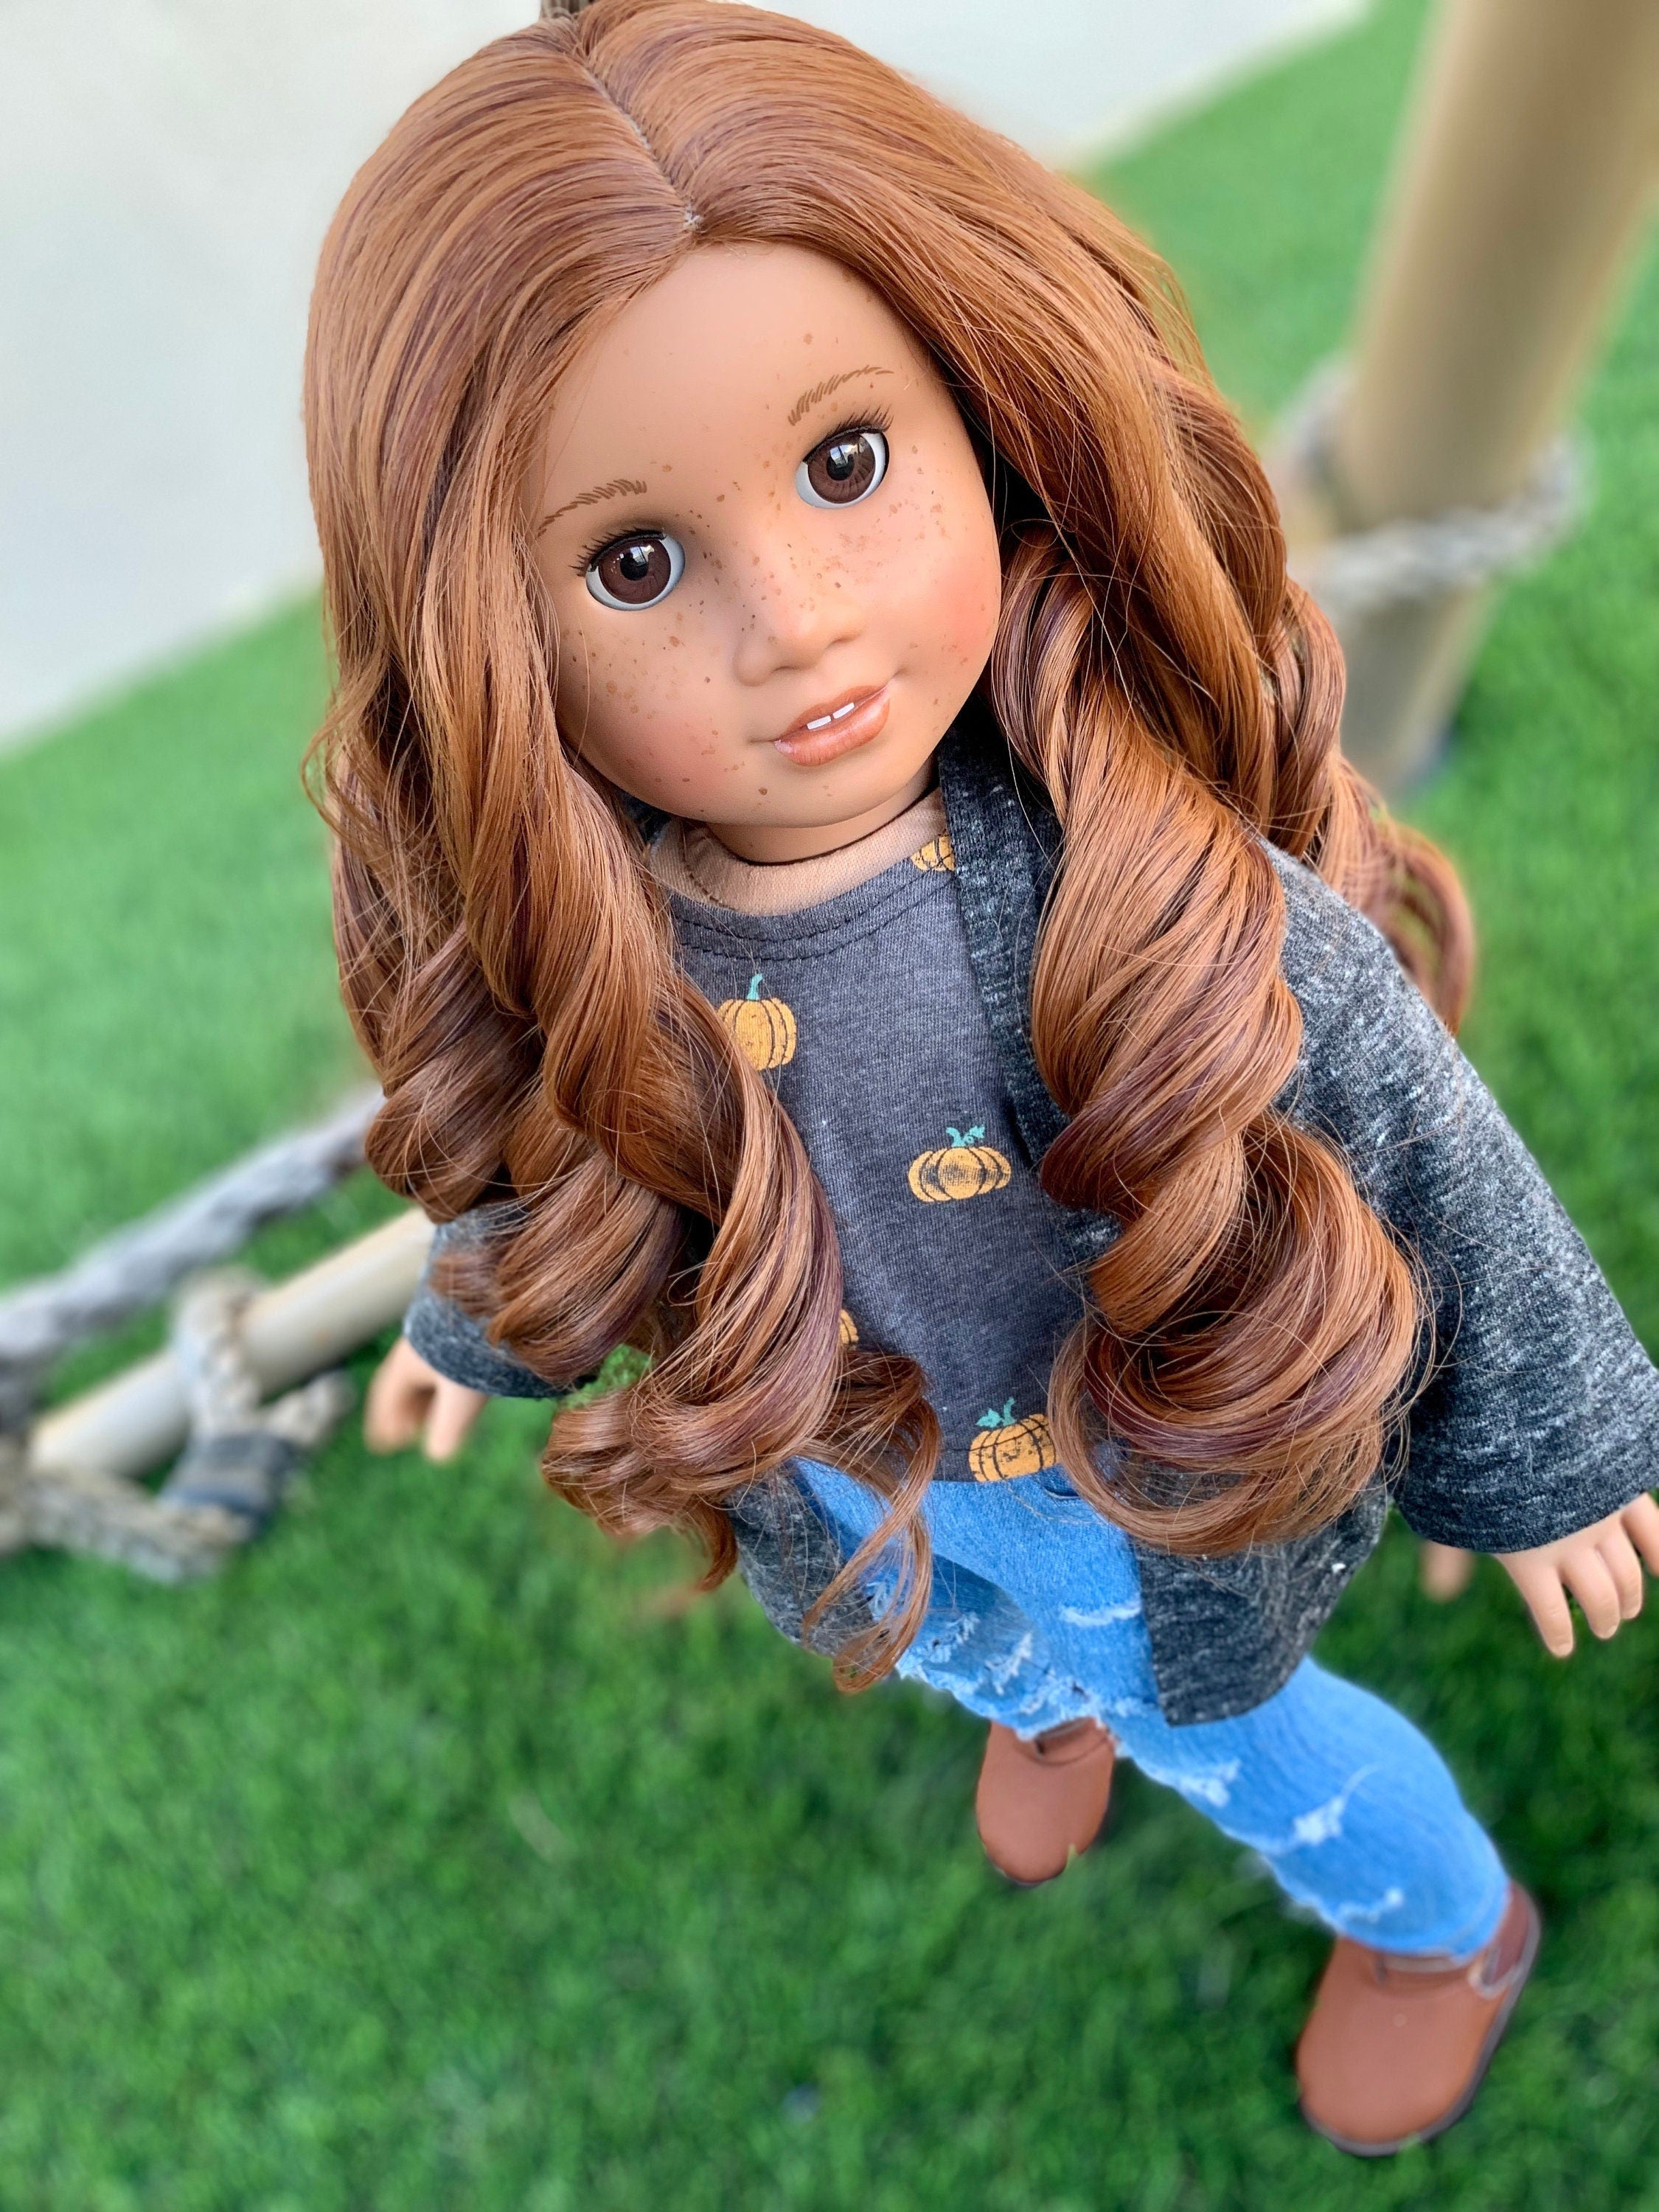 Custom doll wig for 18" American Girl Dolls - Heat Safe - Tangle Resistant - fits 10-11" head size of 18" dolls Our Generation Journey Gotz